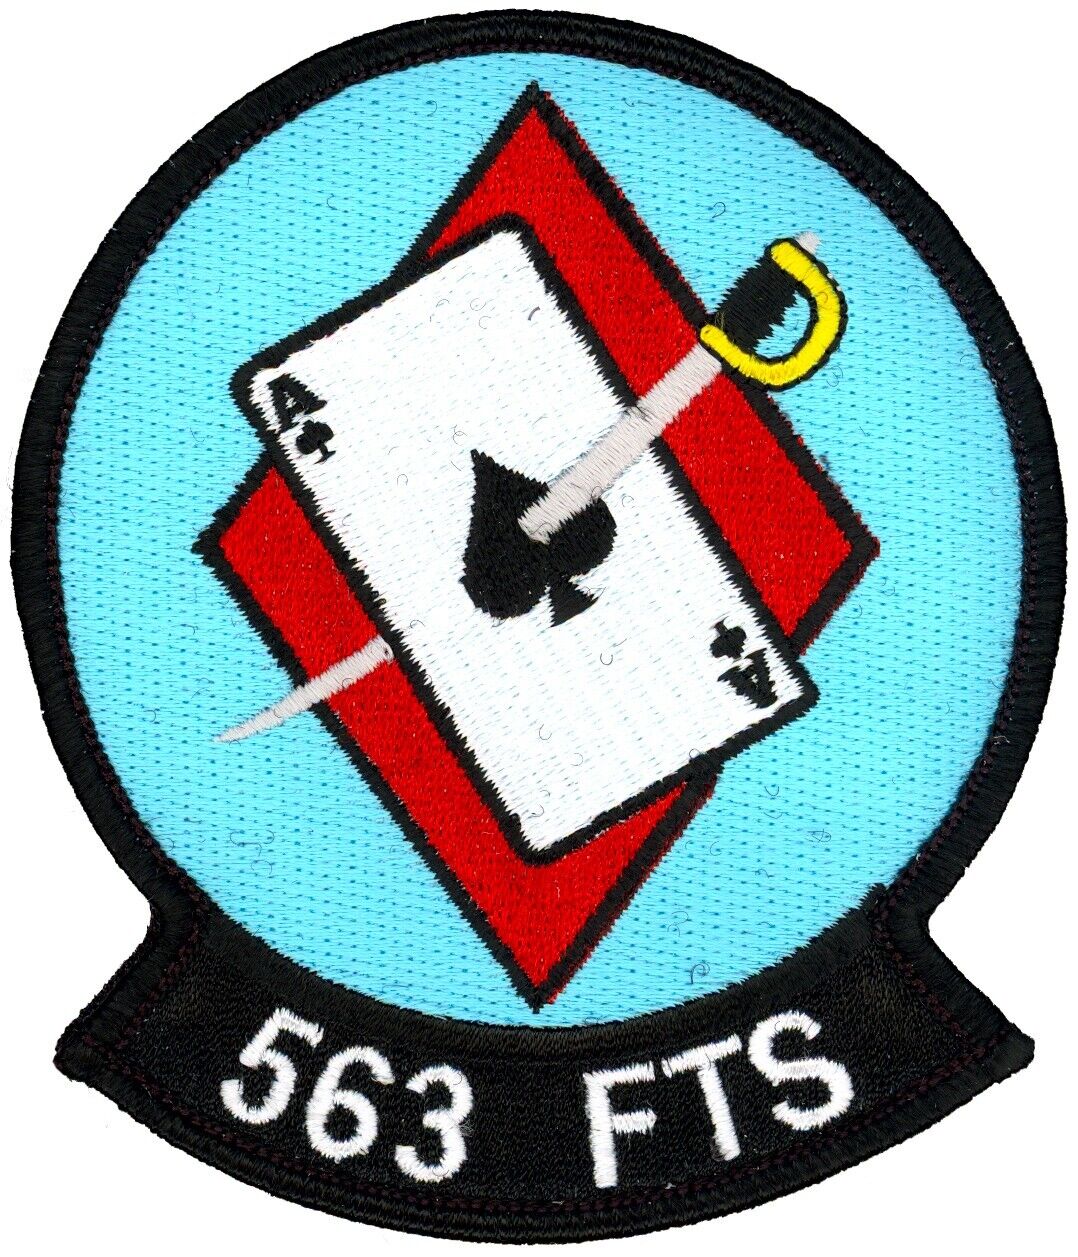 USAF 563d FLYING TRAINING SQUADRON PATCH